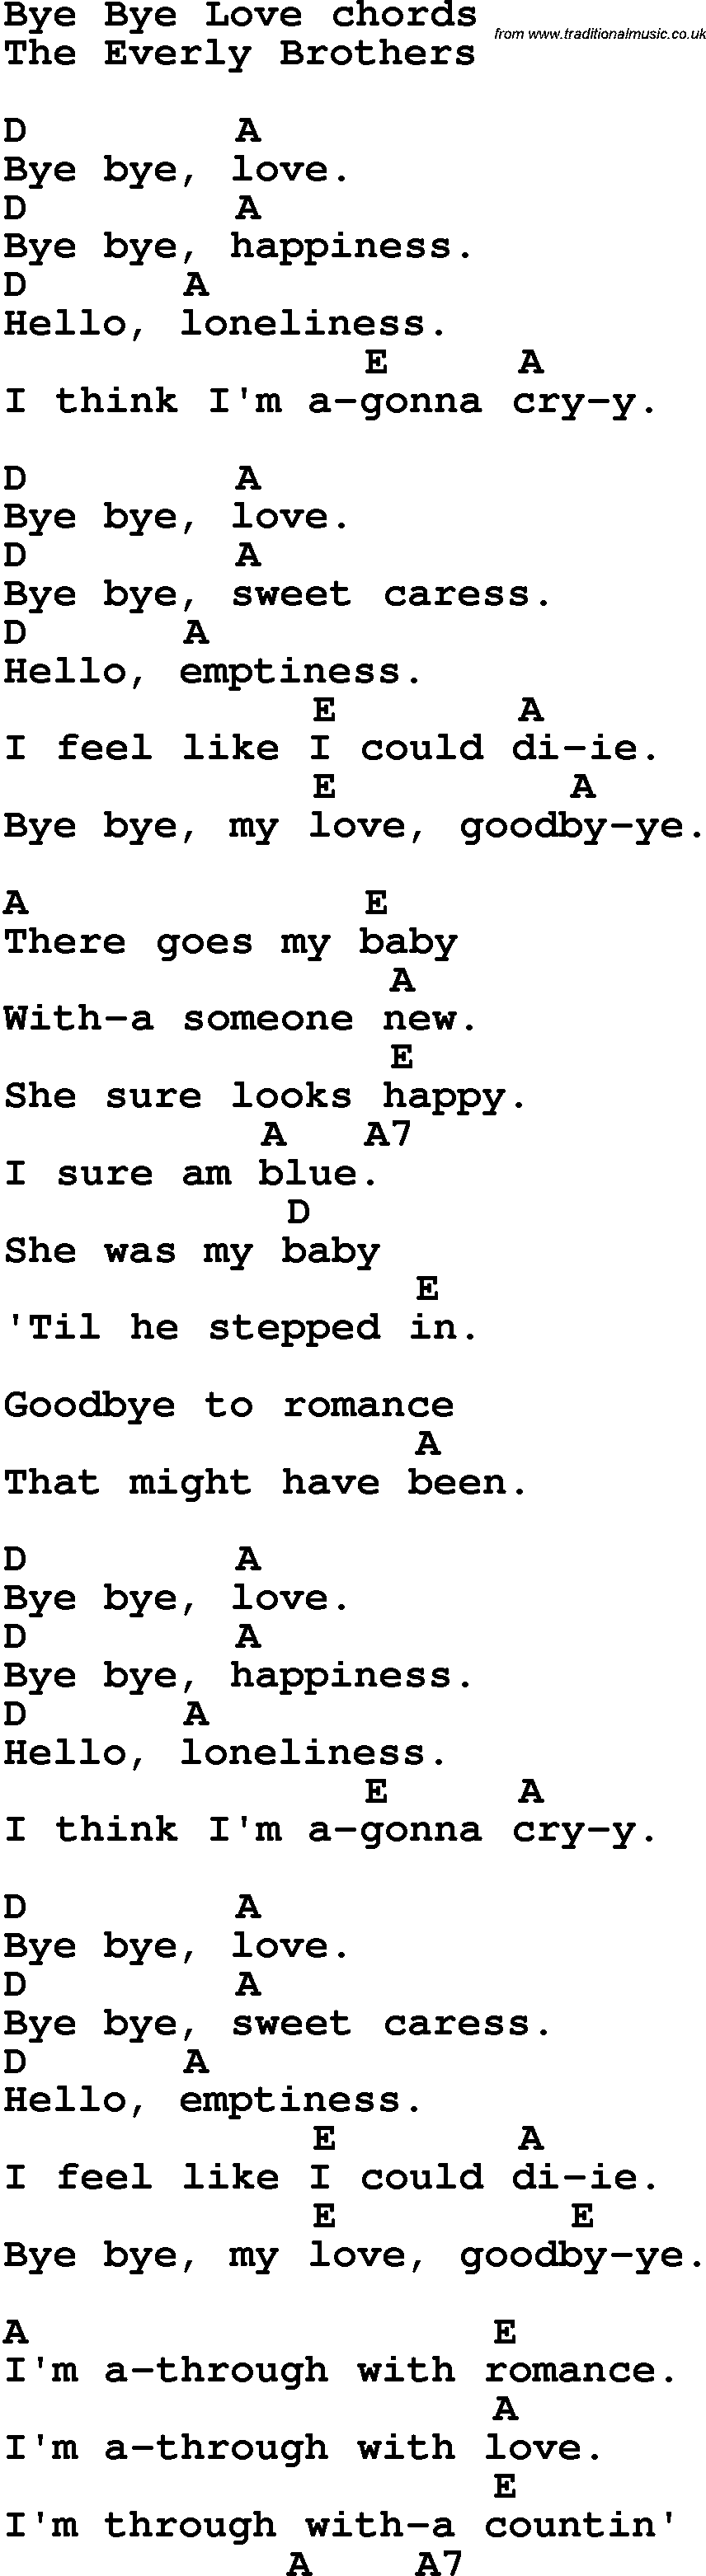 Song Lyrics with guitar chords for Bye Bye Love